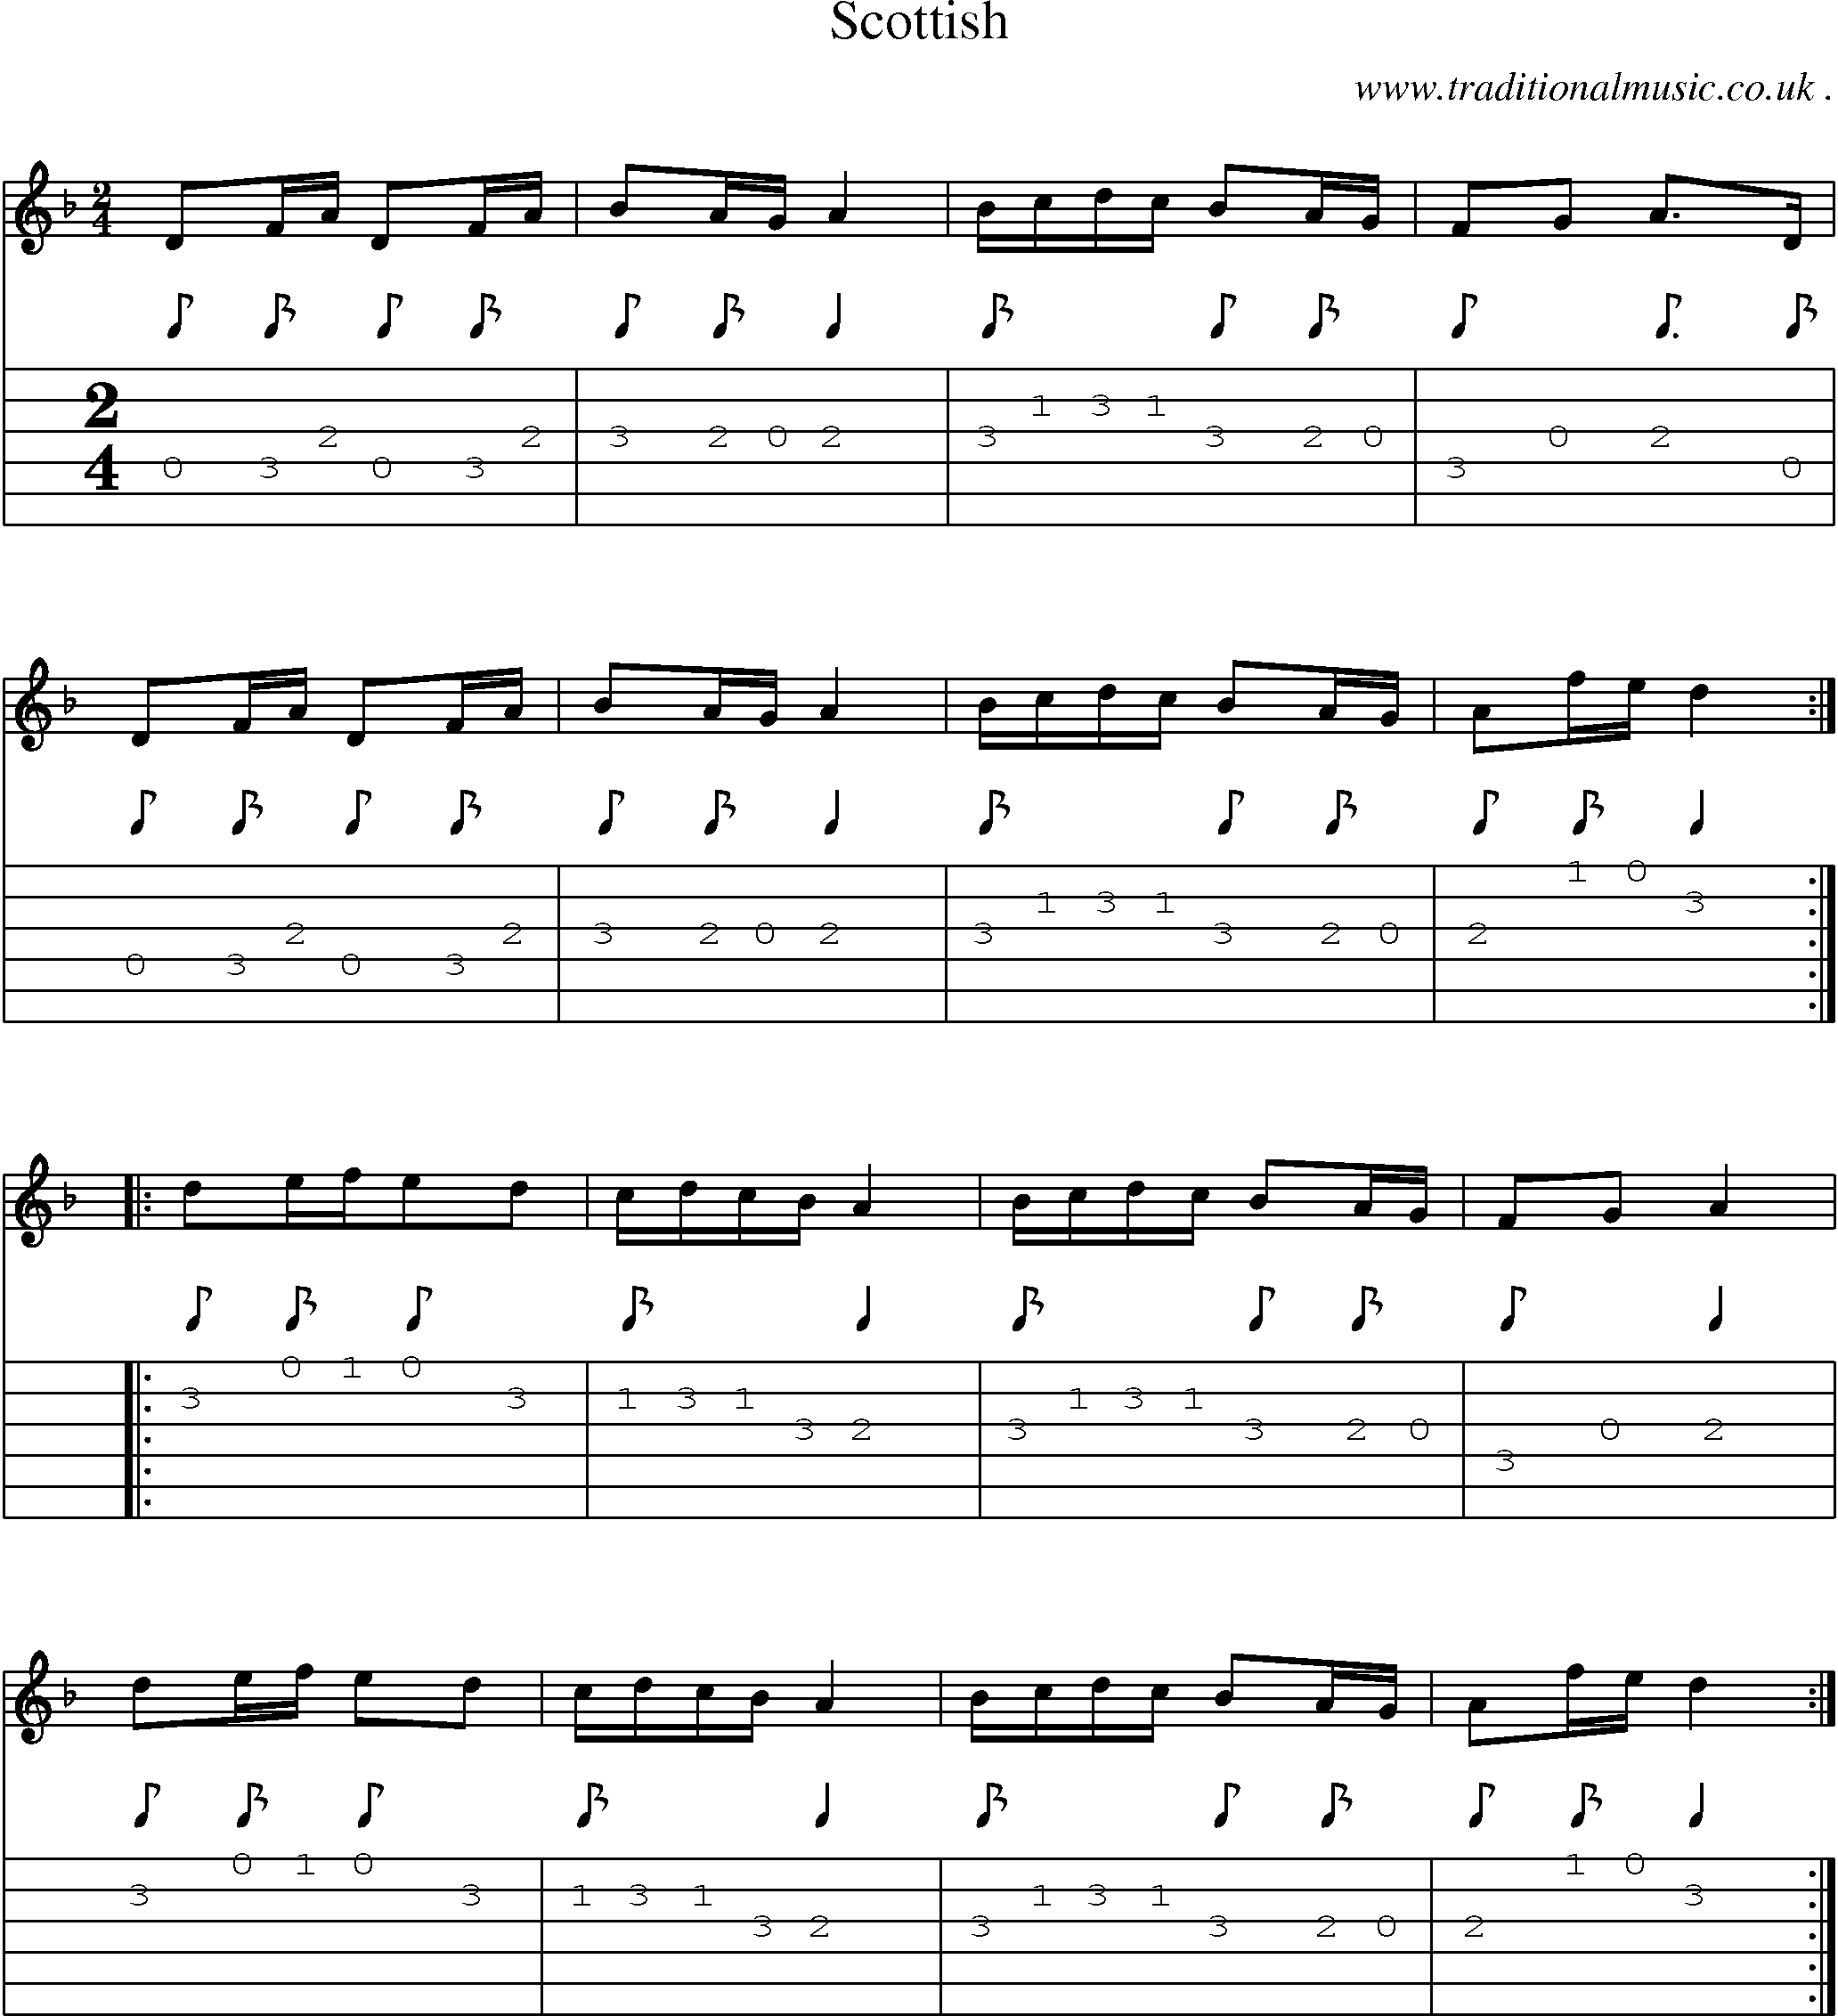 Sheet-Music and Guitar Tabs for Scottish